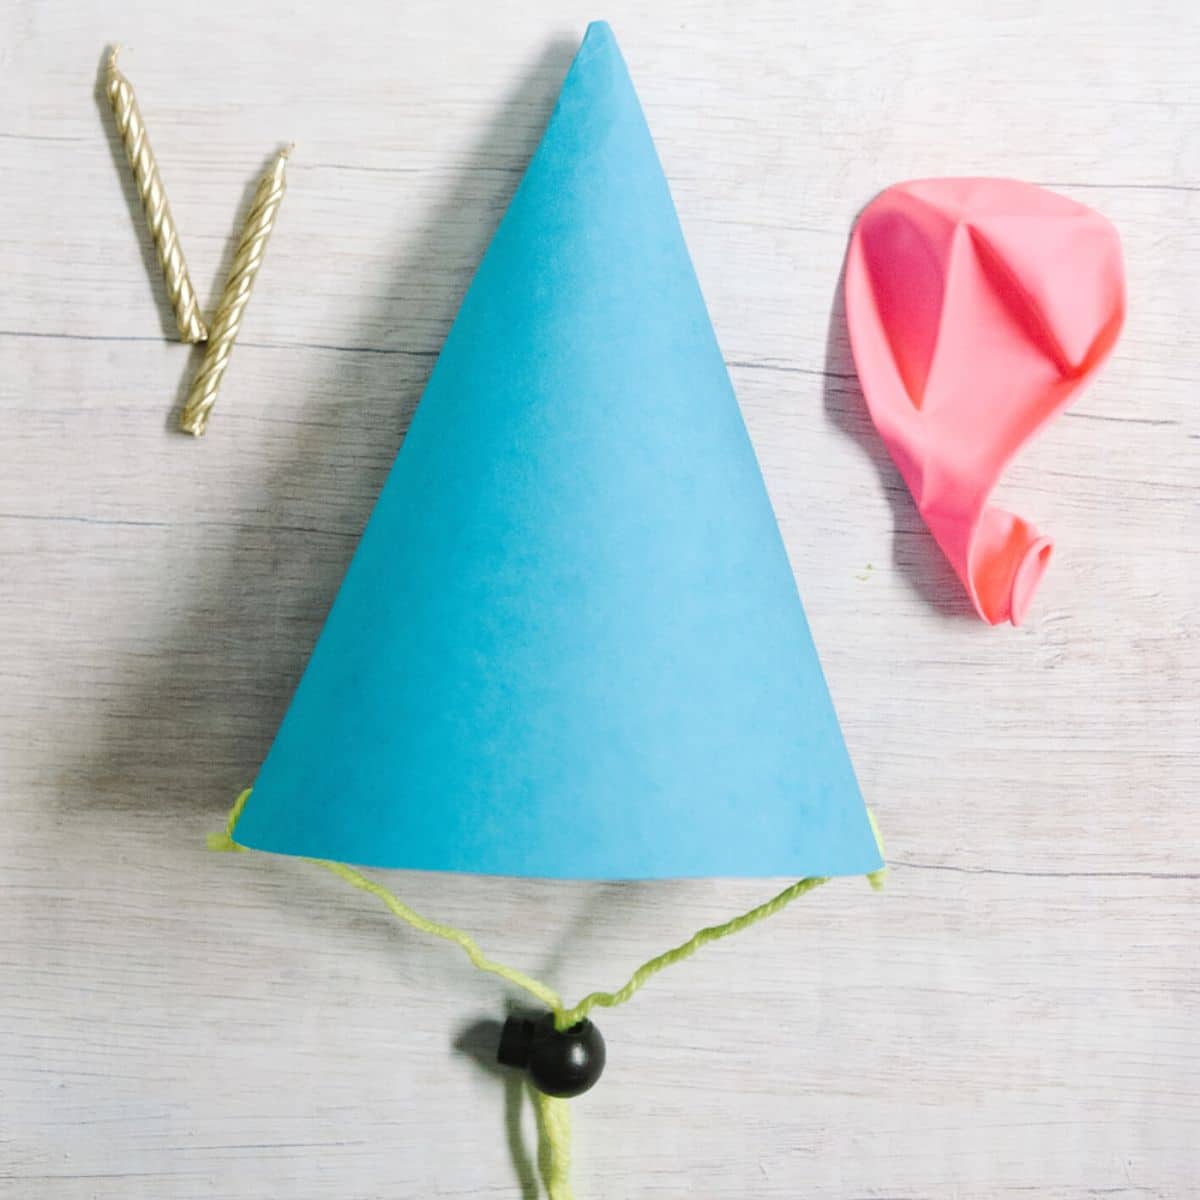 DIY paper party hat made with construction paper, yarn, and a cord lock stopper. Laying on a table top with birthday candles and a pink deflated balloon.